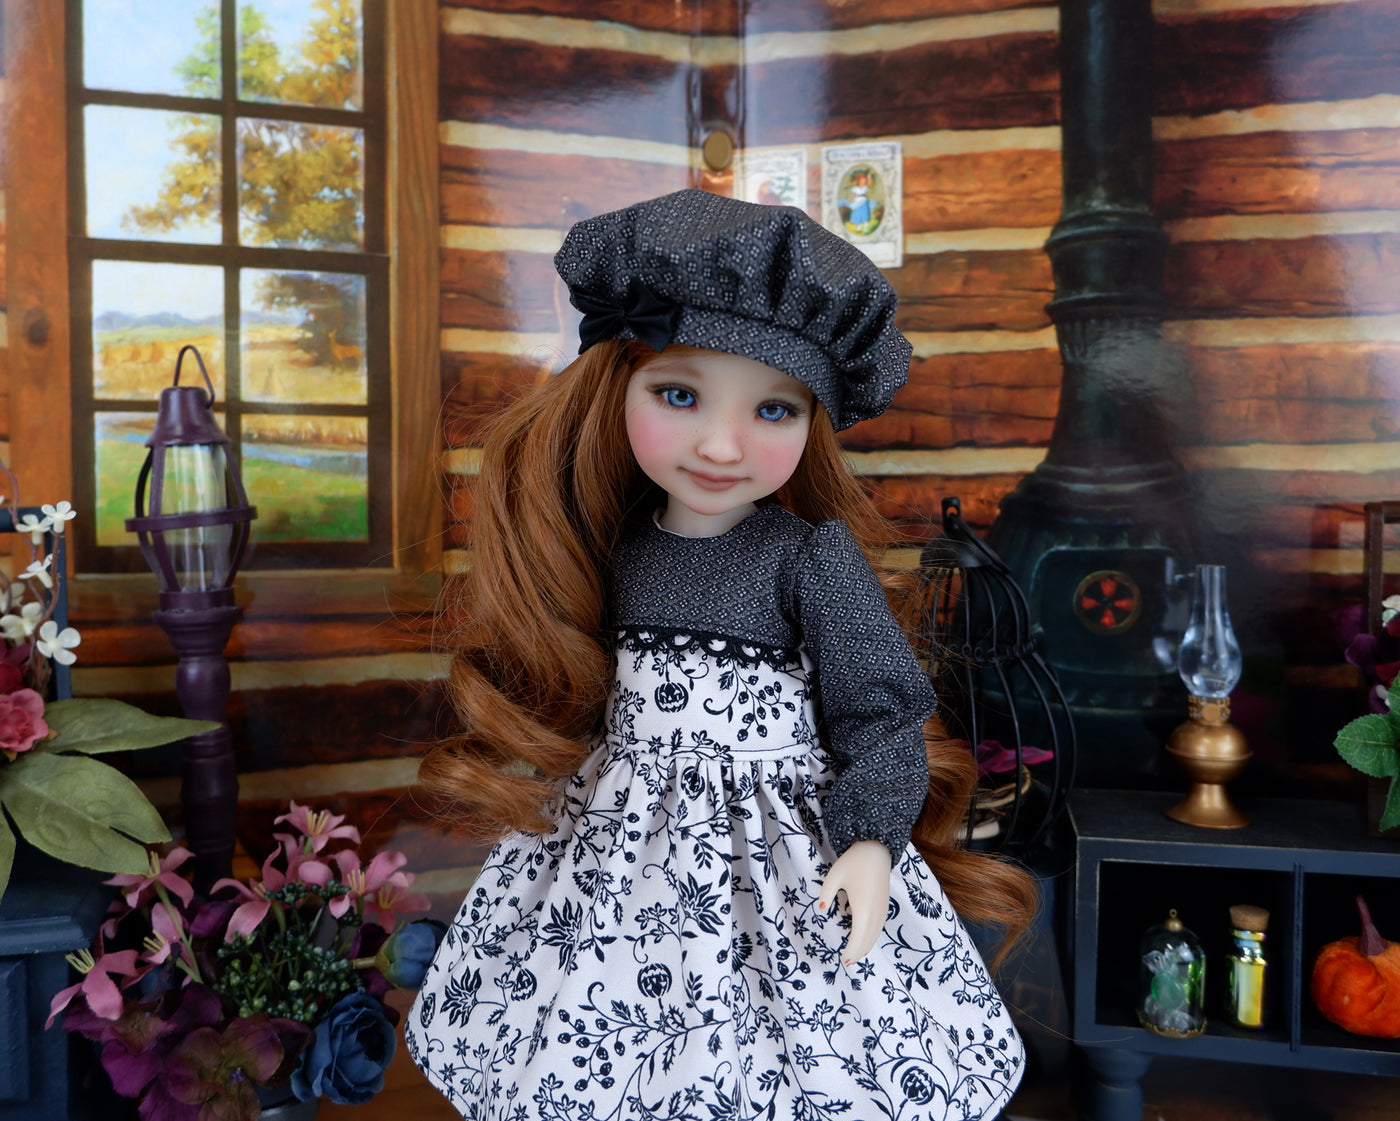 Scary Swirls - dress and shoes for Ruby Red Fashion Friends doll